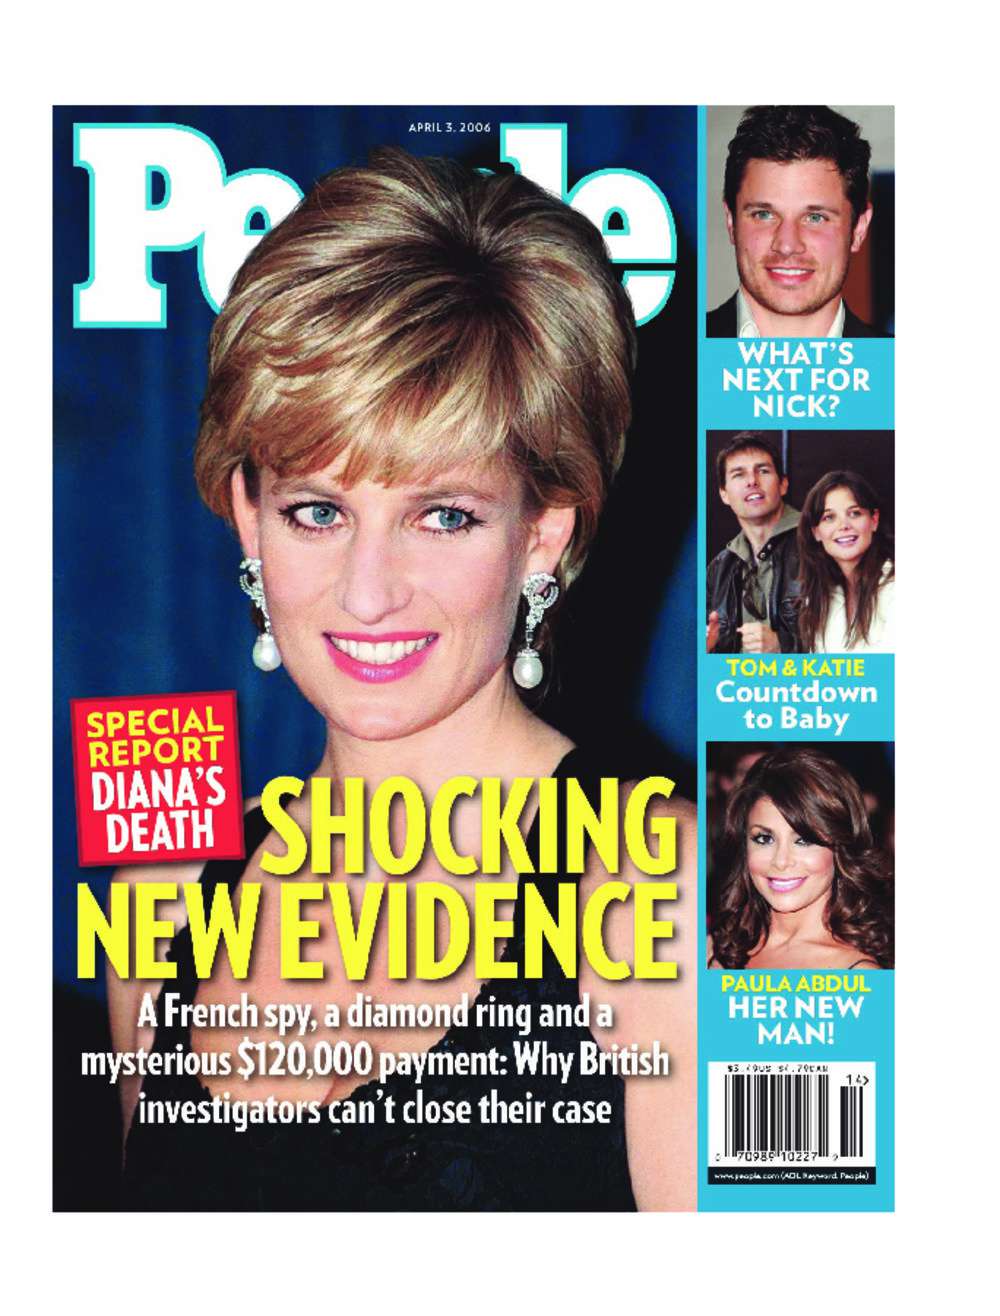 Princess Diana on the cover of People Magazine